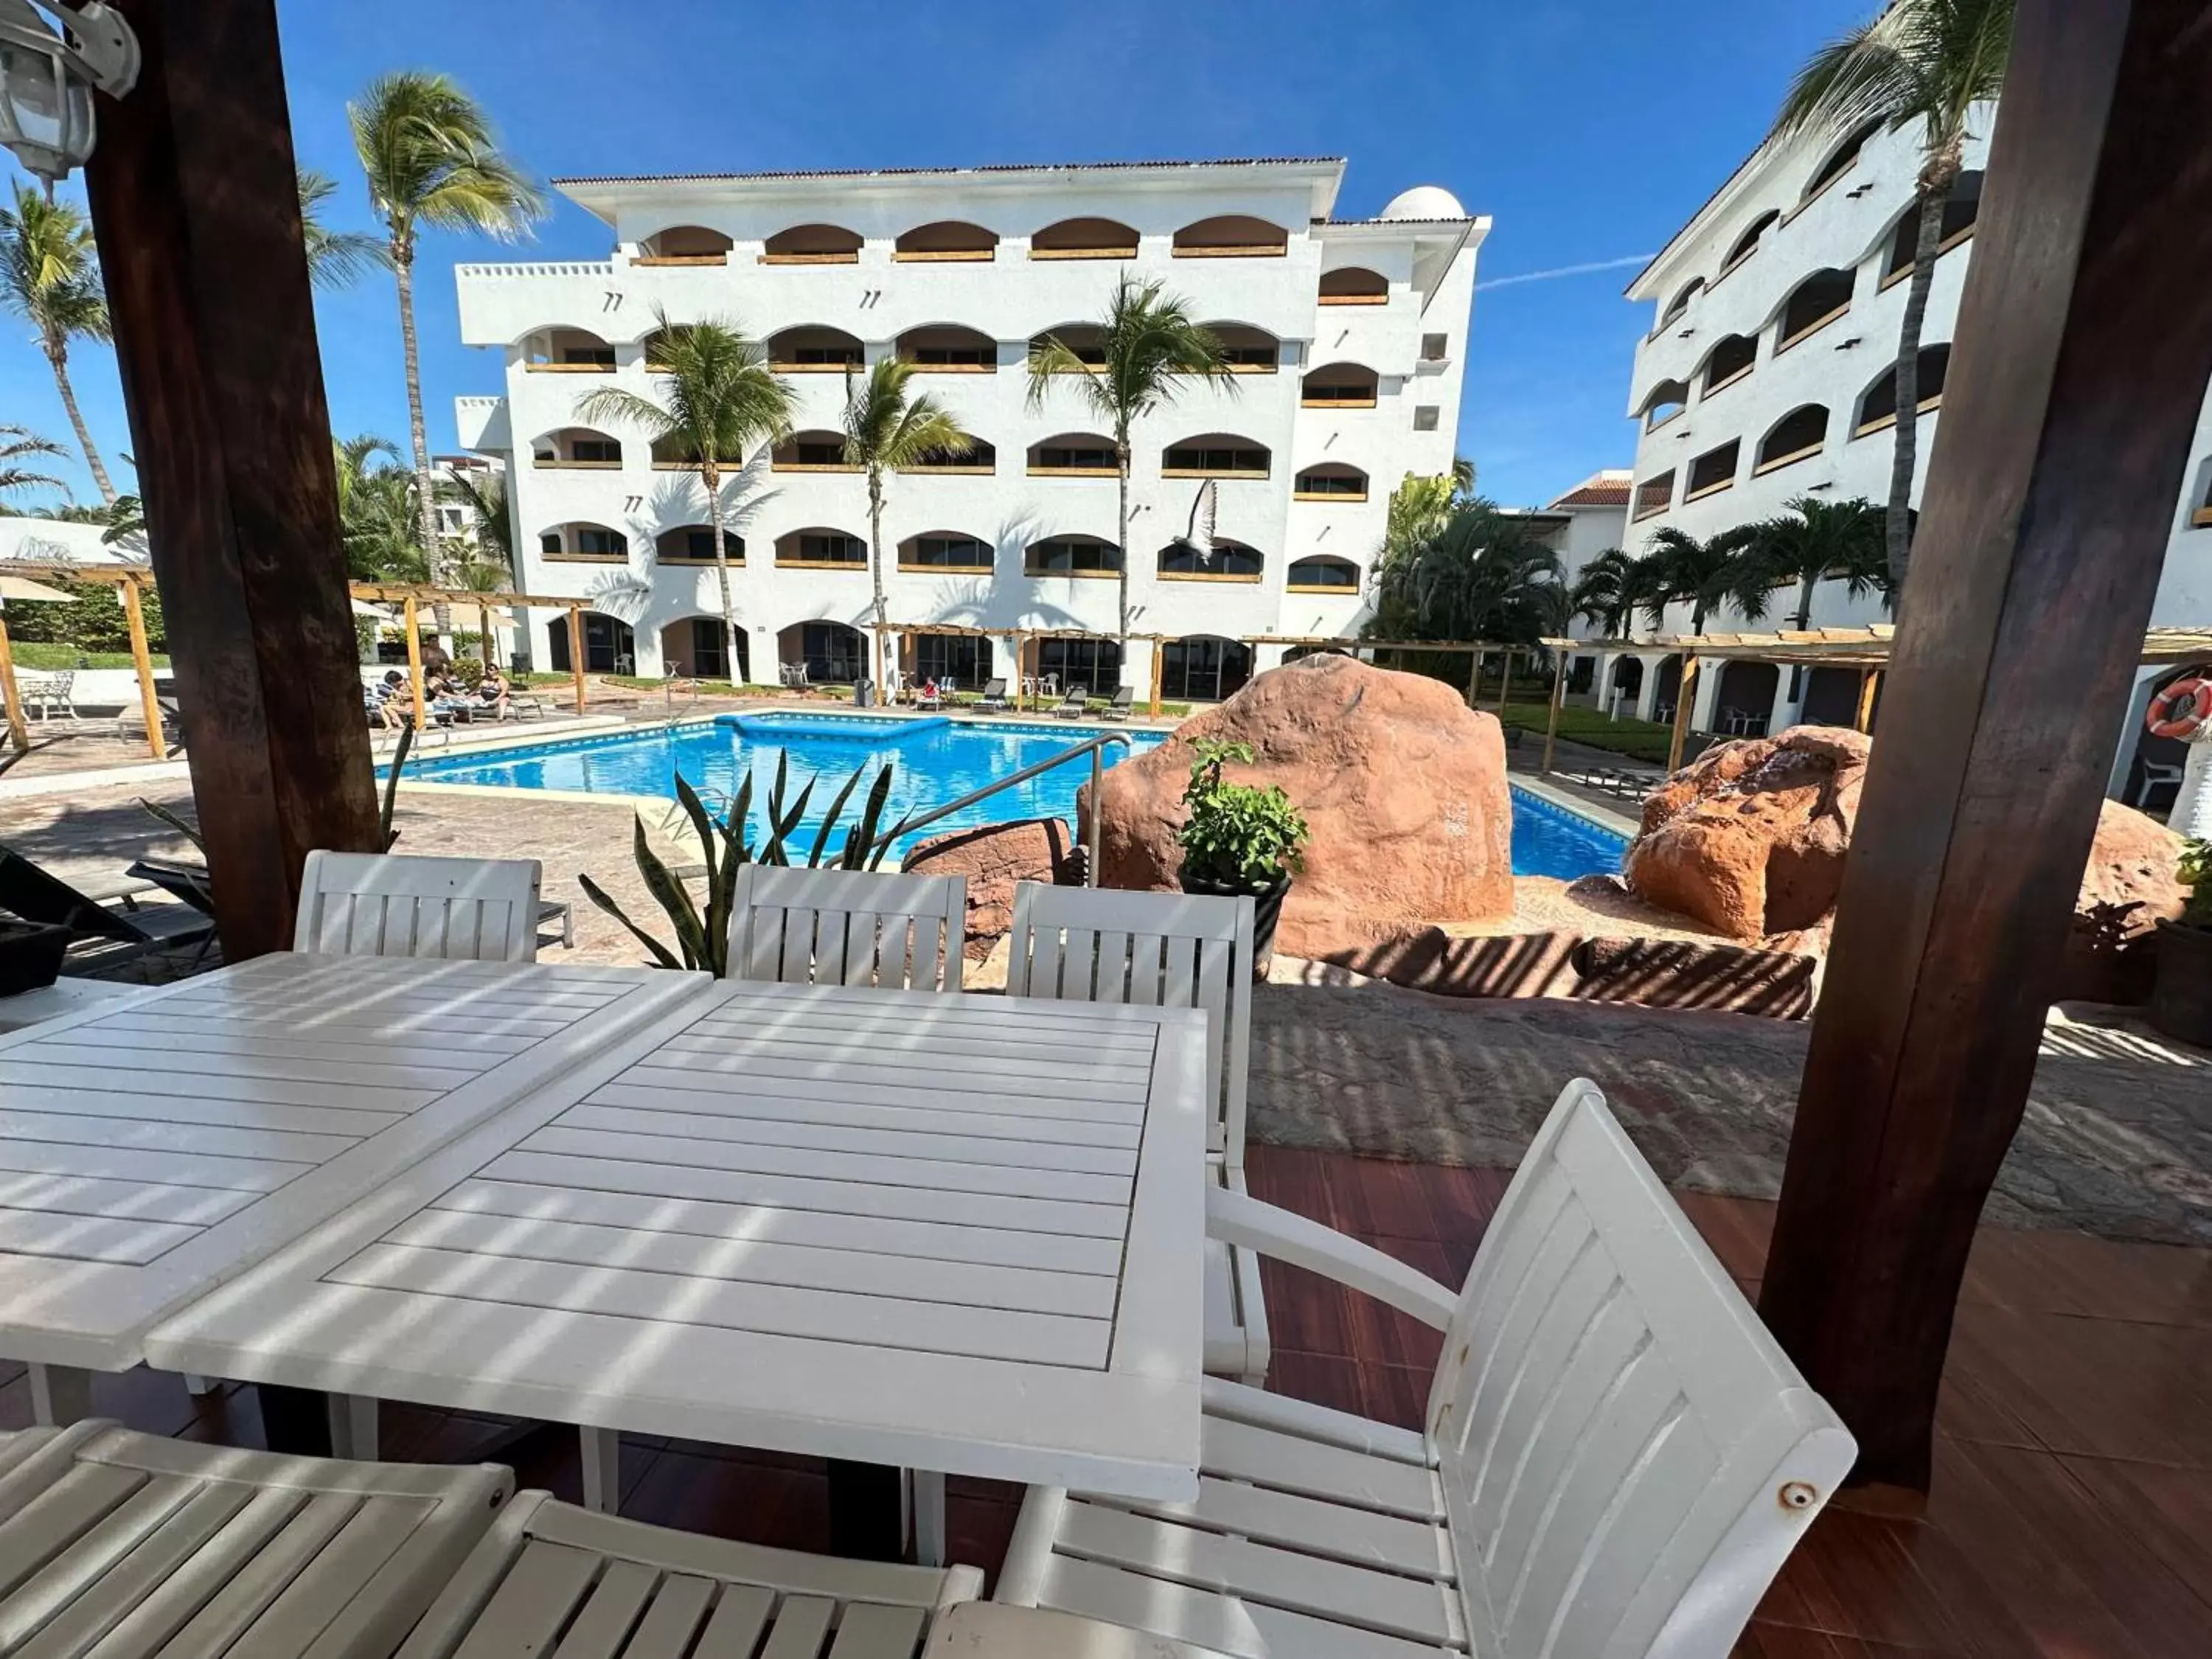 Property building, Pool View in Hotel Quijote Inn